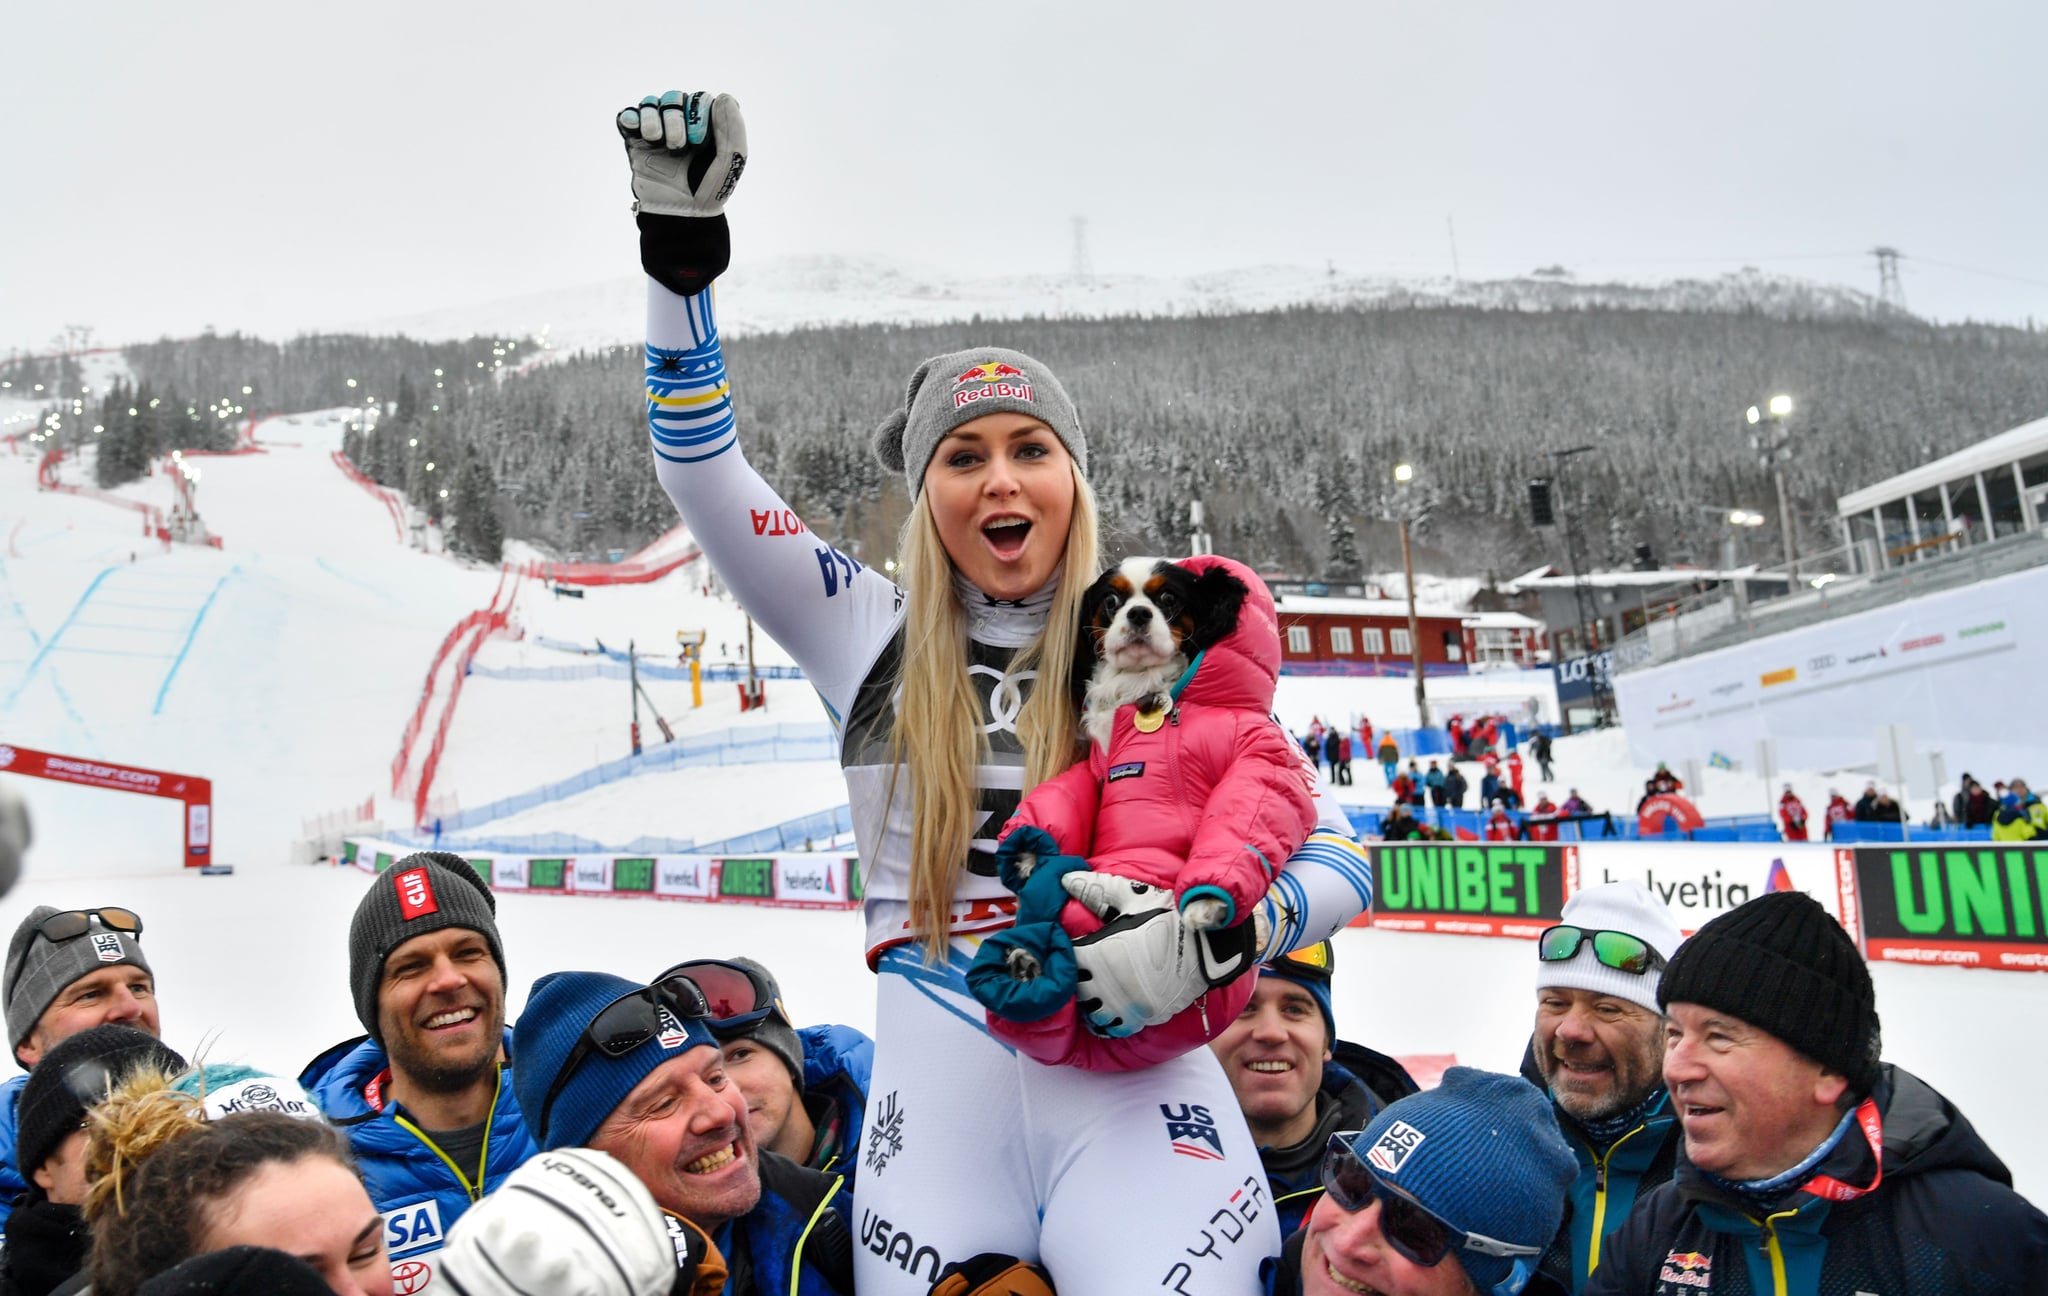 Third placed US' Lindsey Vonn celebrates with the US team and her dog Lucy after the Women's Downhill event of the 2019 FIS Alpine Ski World Championships at the National Arena in Are, Sweden on February 10, 2019. - Vonn, 34, who will retire from competitive skiing, is the most successful women skier of all time, with a record 20 World Cup titles to her name and 82 victories on the circuit. (Photo by Anders WIKLUND / TT News Agency / AFP) / Sweden OUT        (Photo credit should read ANDERS WIKLUND/AFP via Getty Images)